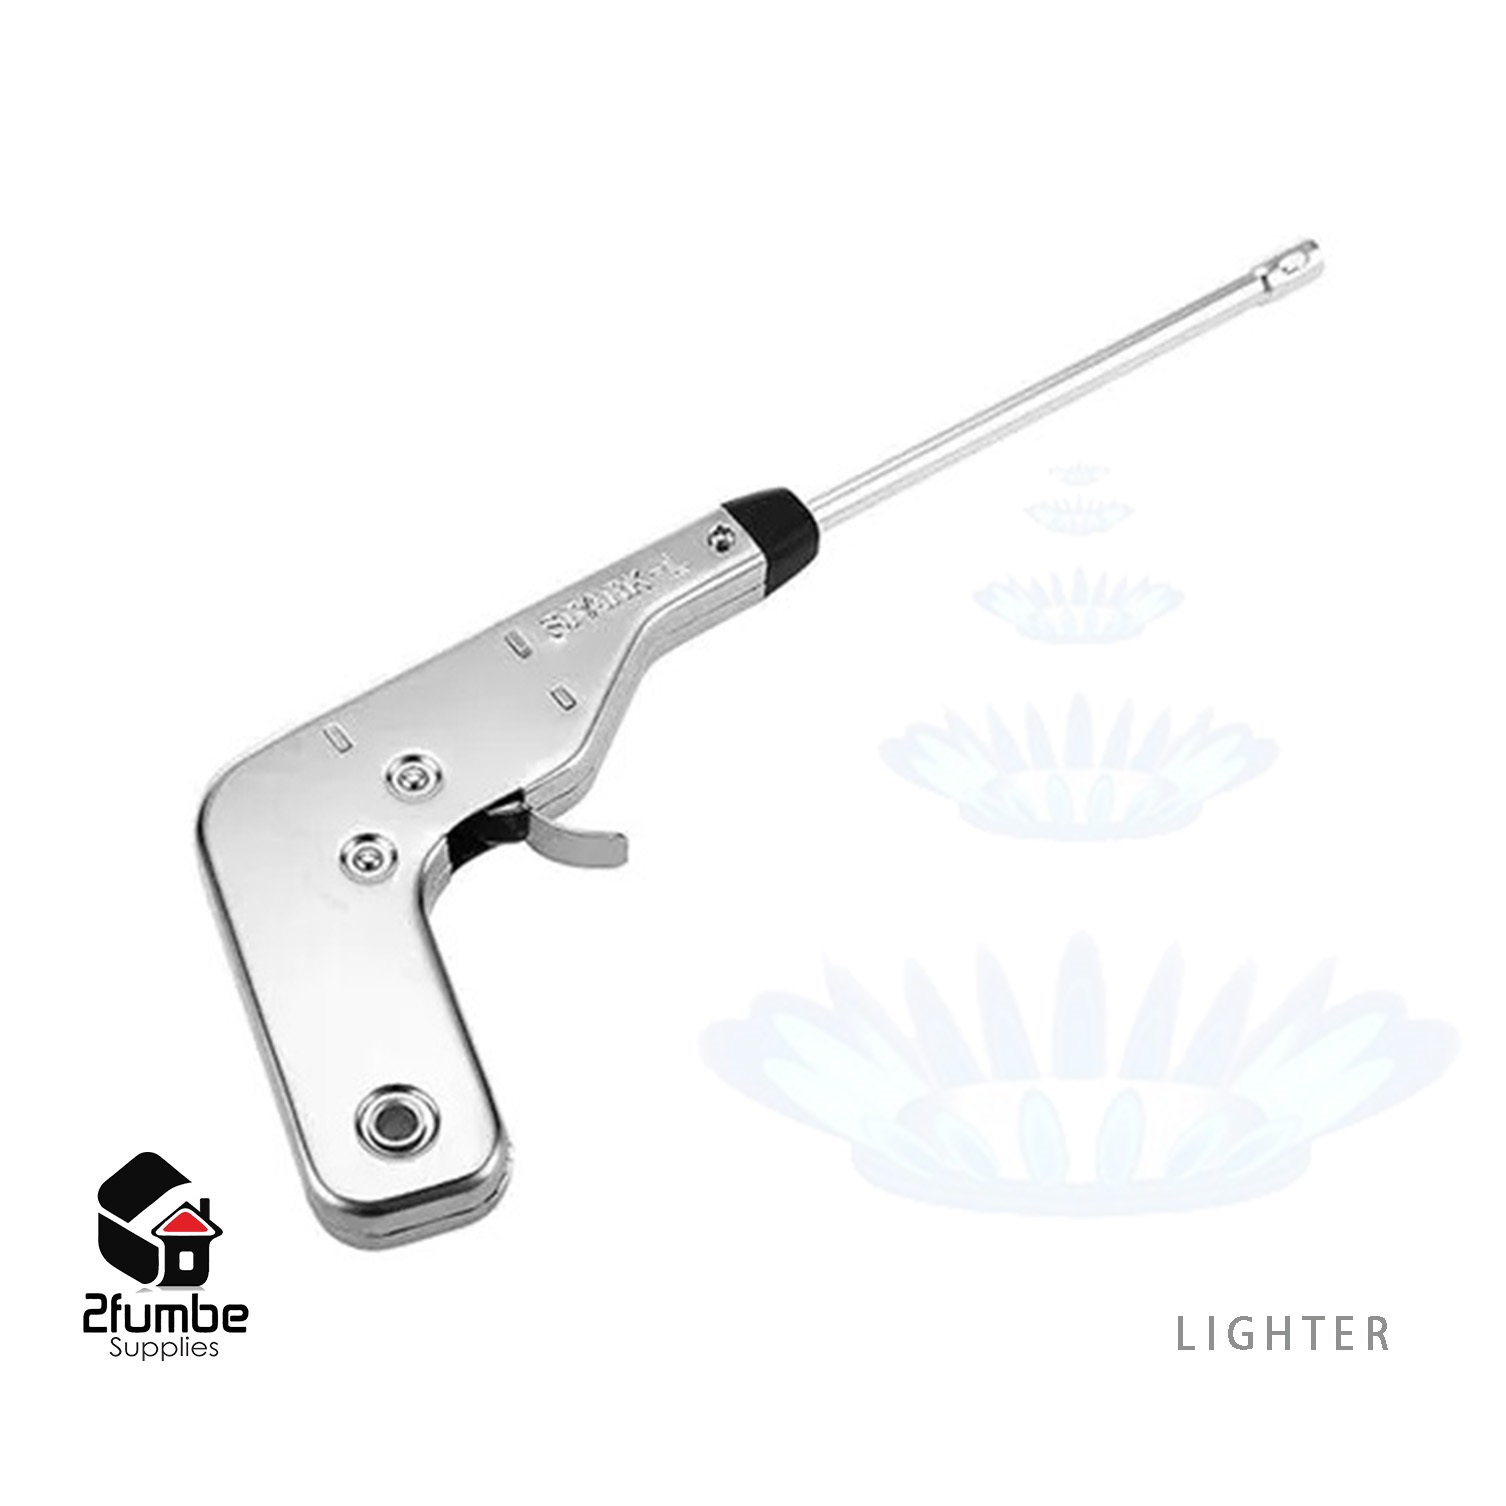 LTR04-Stainless steel gas lighter-2fumbe